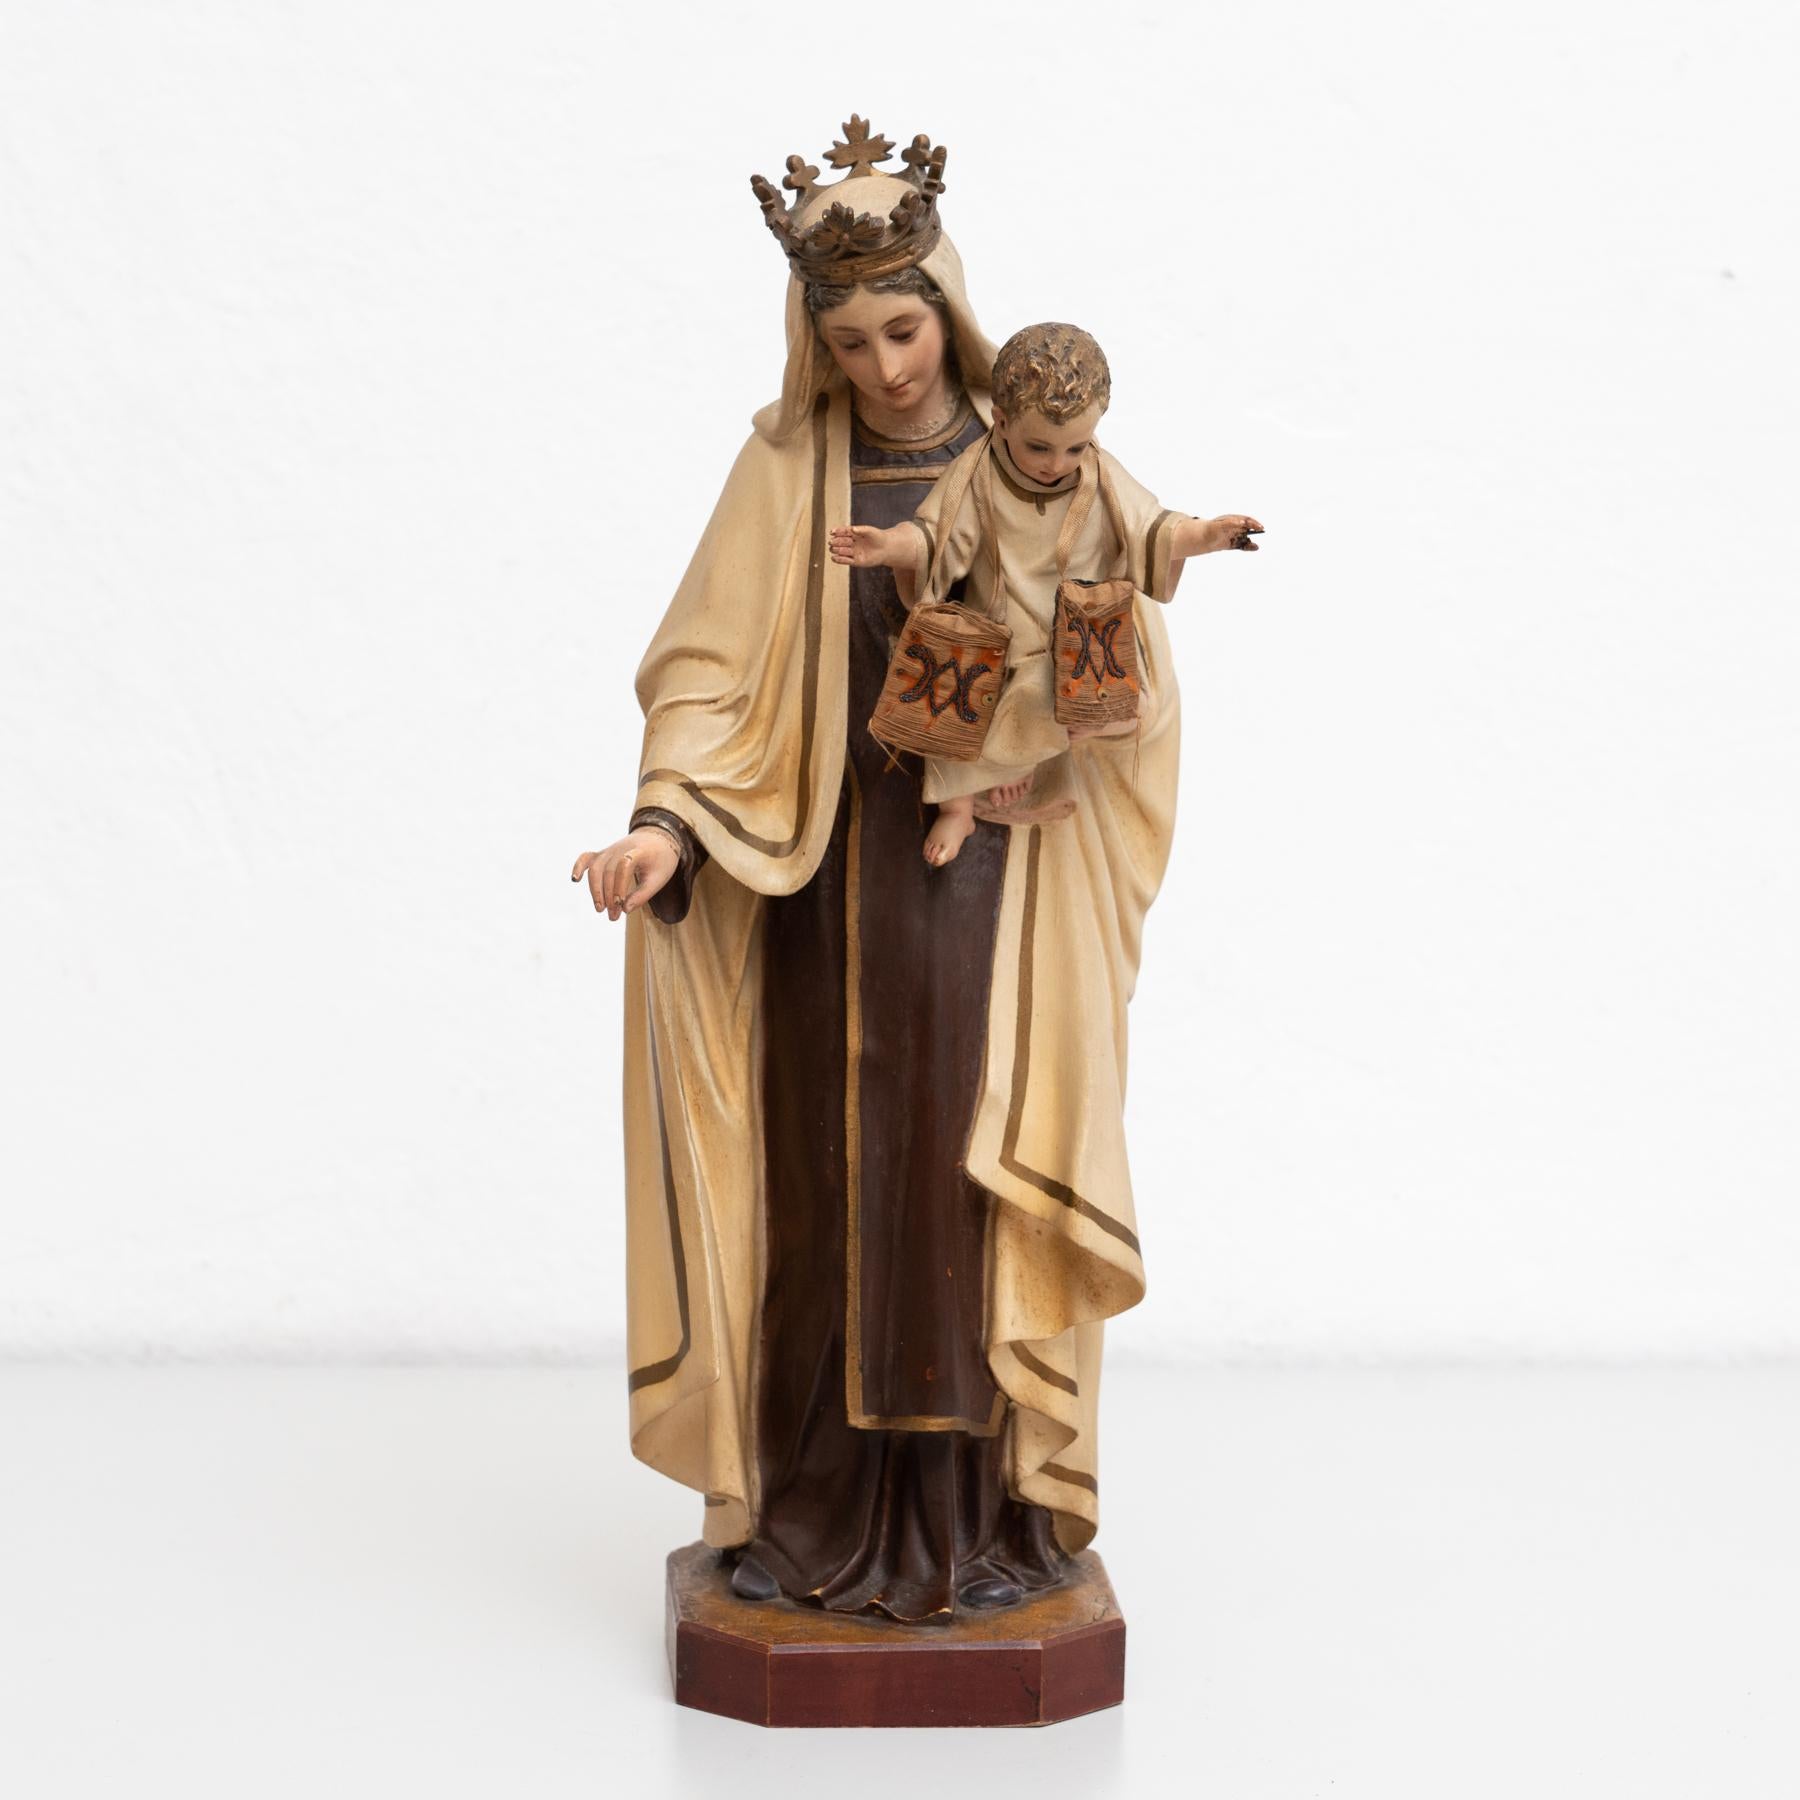 Traditional religious hand painted plaster figure of a virgin.

Signed.

Made in traditional Catalan atelier in Olot, Spain, circa 1940.

In original condition, with minor wear consistent with age and use, preserving a beautiful